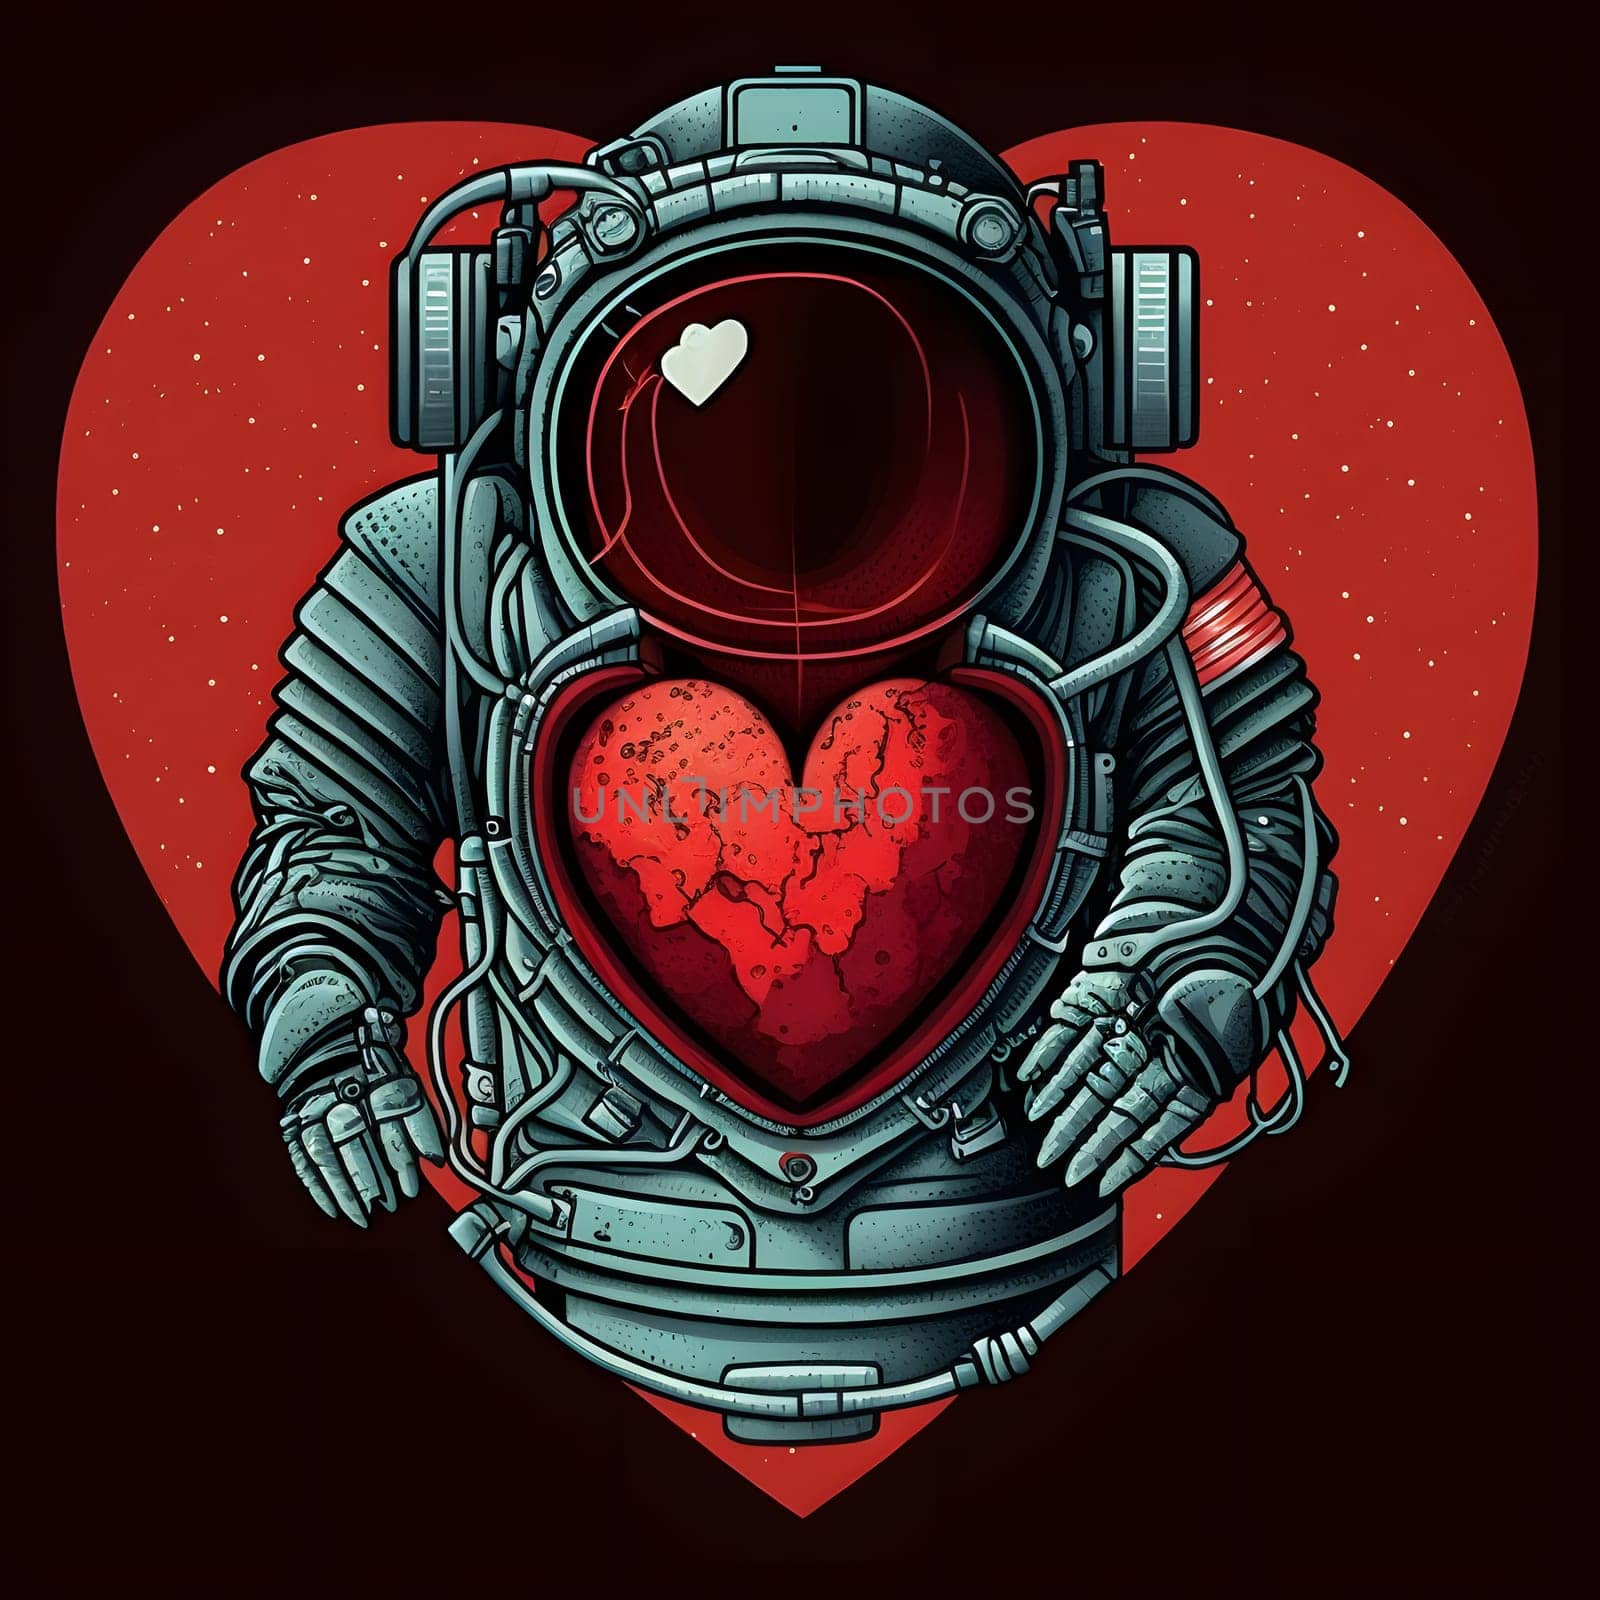 space suit with large red heart in center - nasa syle valentines day logo, neural network generated art. Digitally generated image. Not based on any actual scene or pattern.